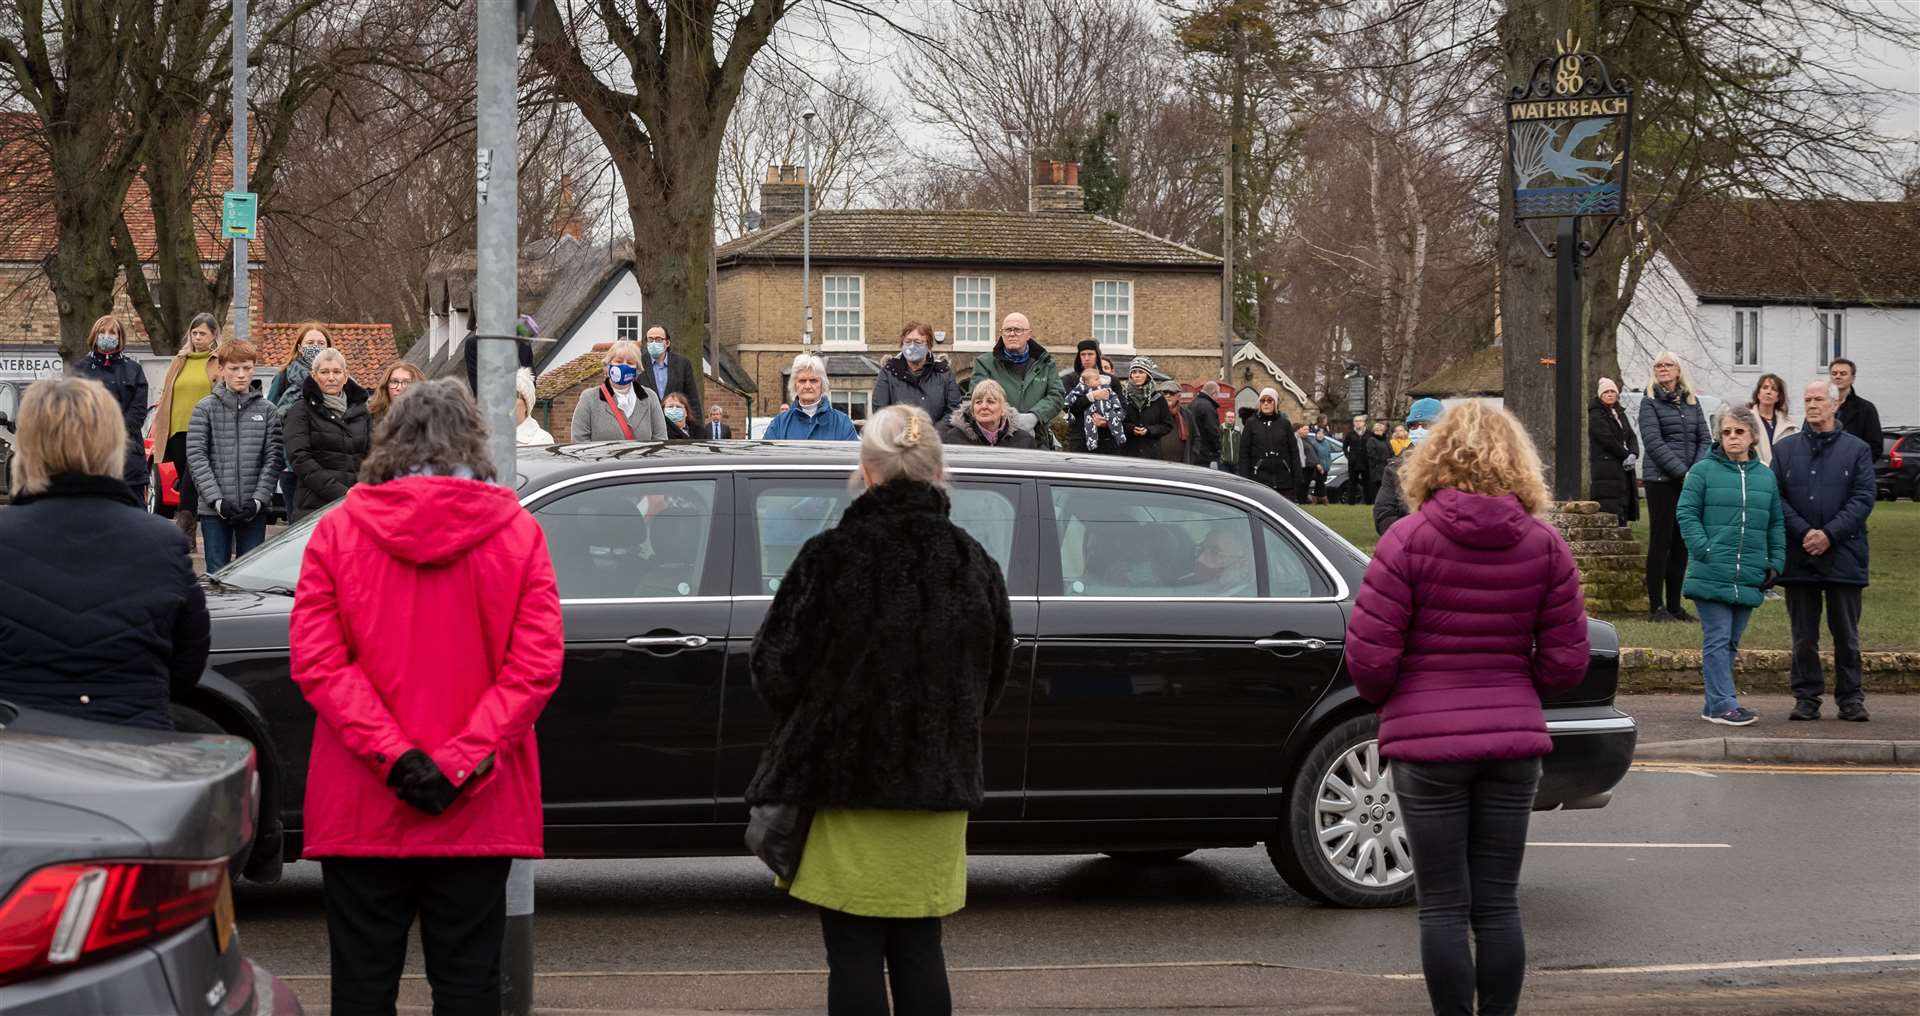 Mourners show their respects as a funeral procession passes by in Waterbeach. Picture: Keith Heppell